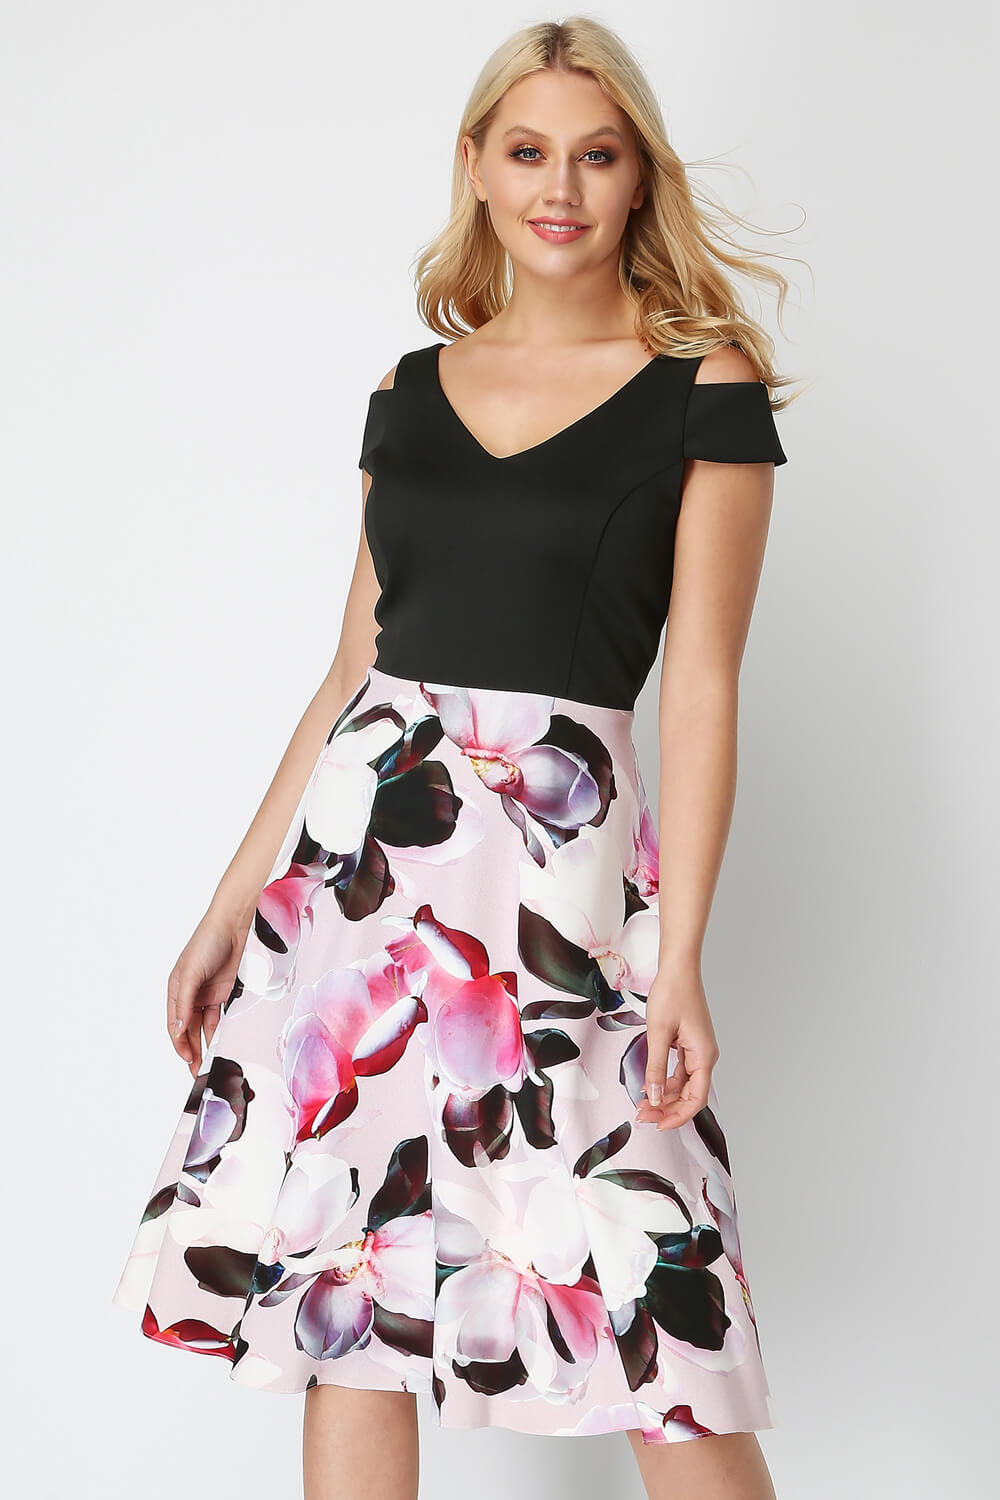 Black Fit and Flare Print Skirt Dress, Image 3 of 4